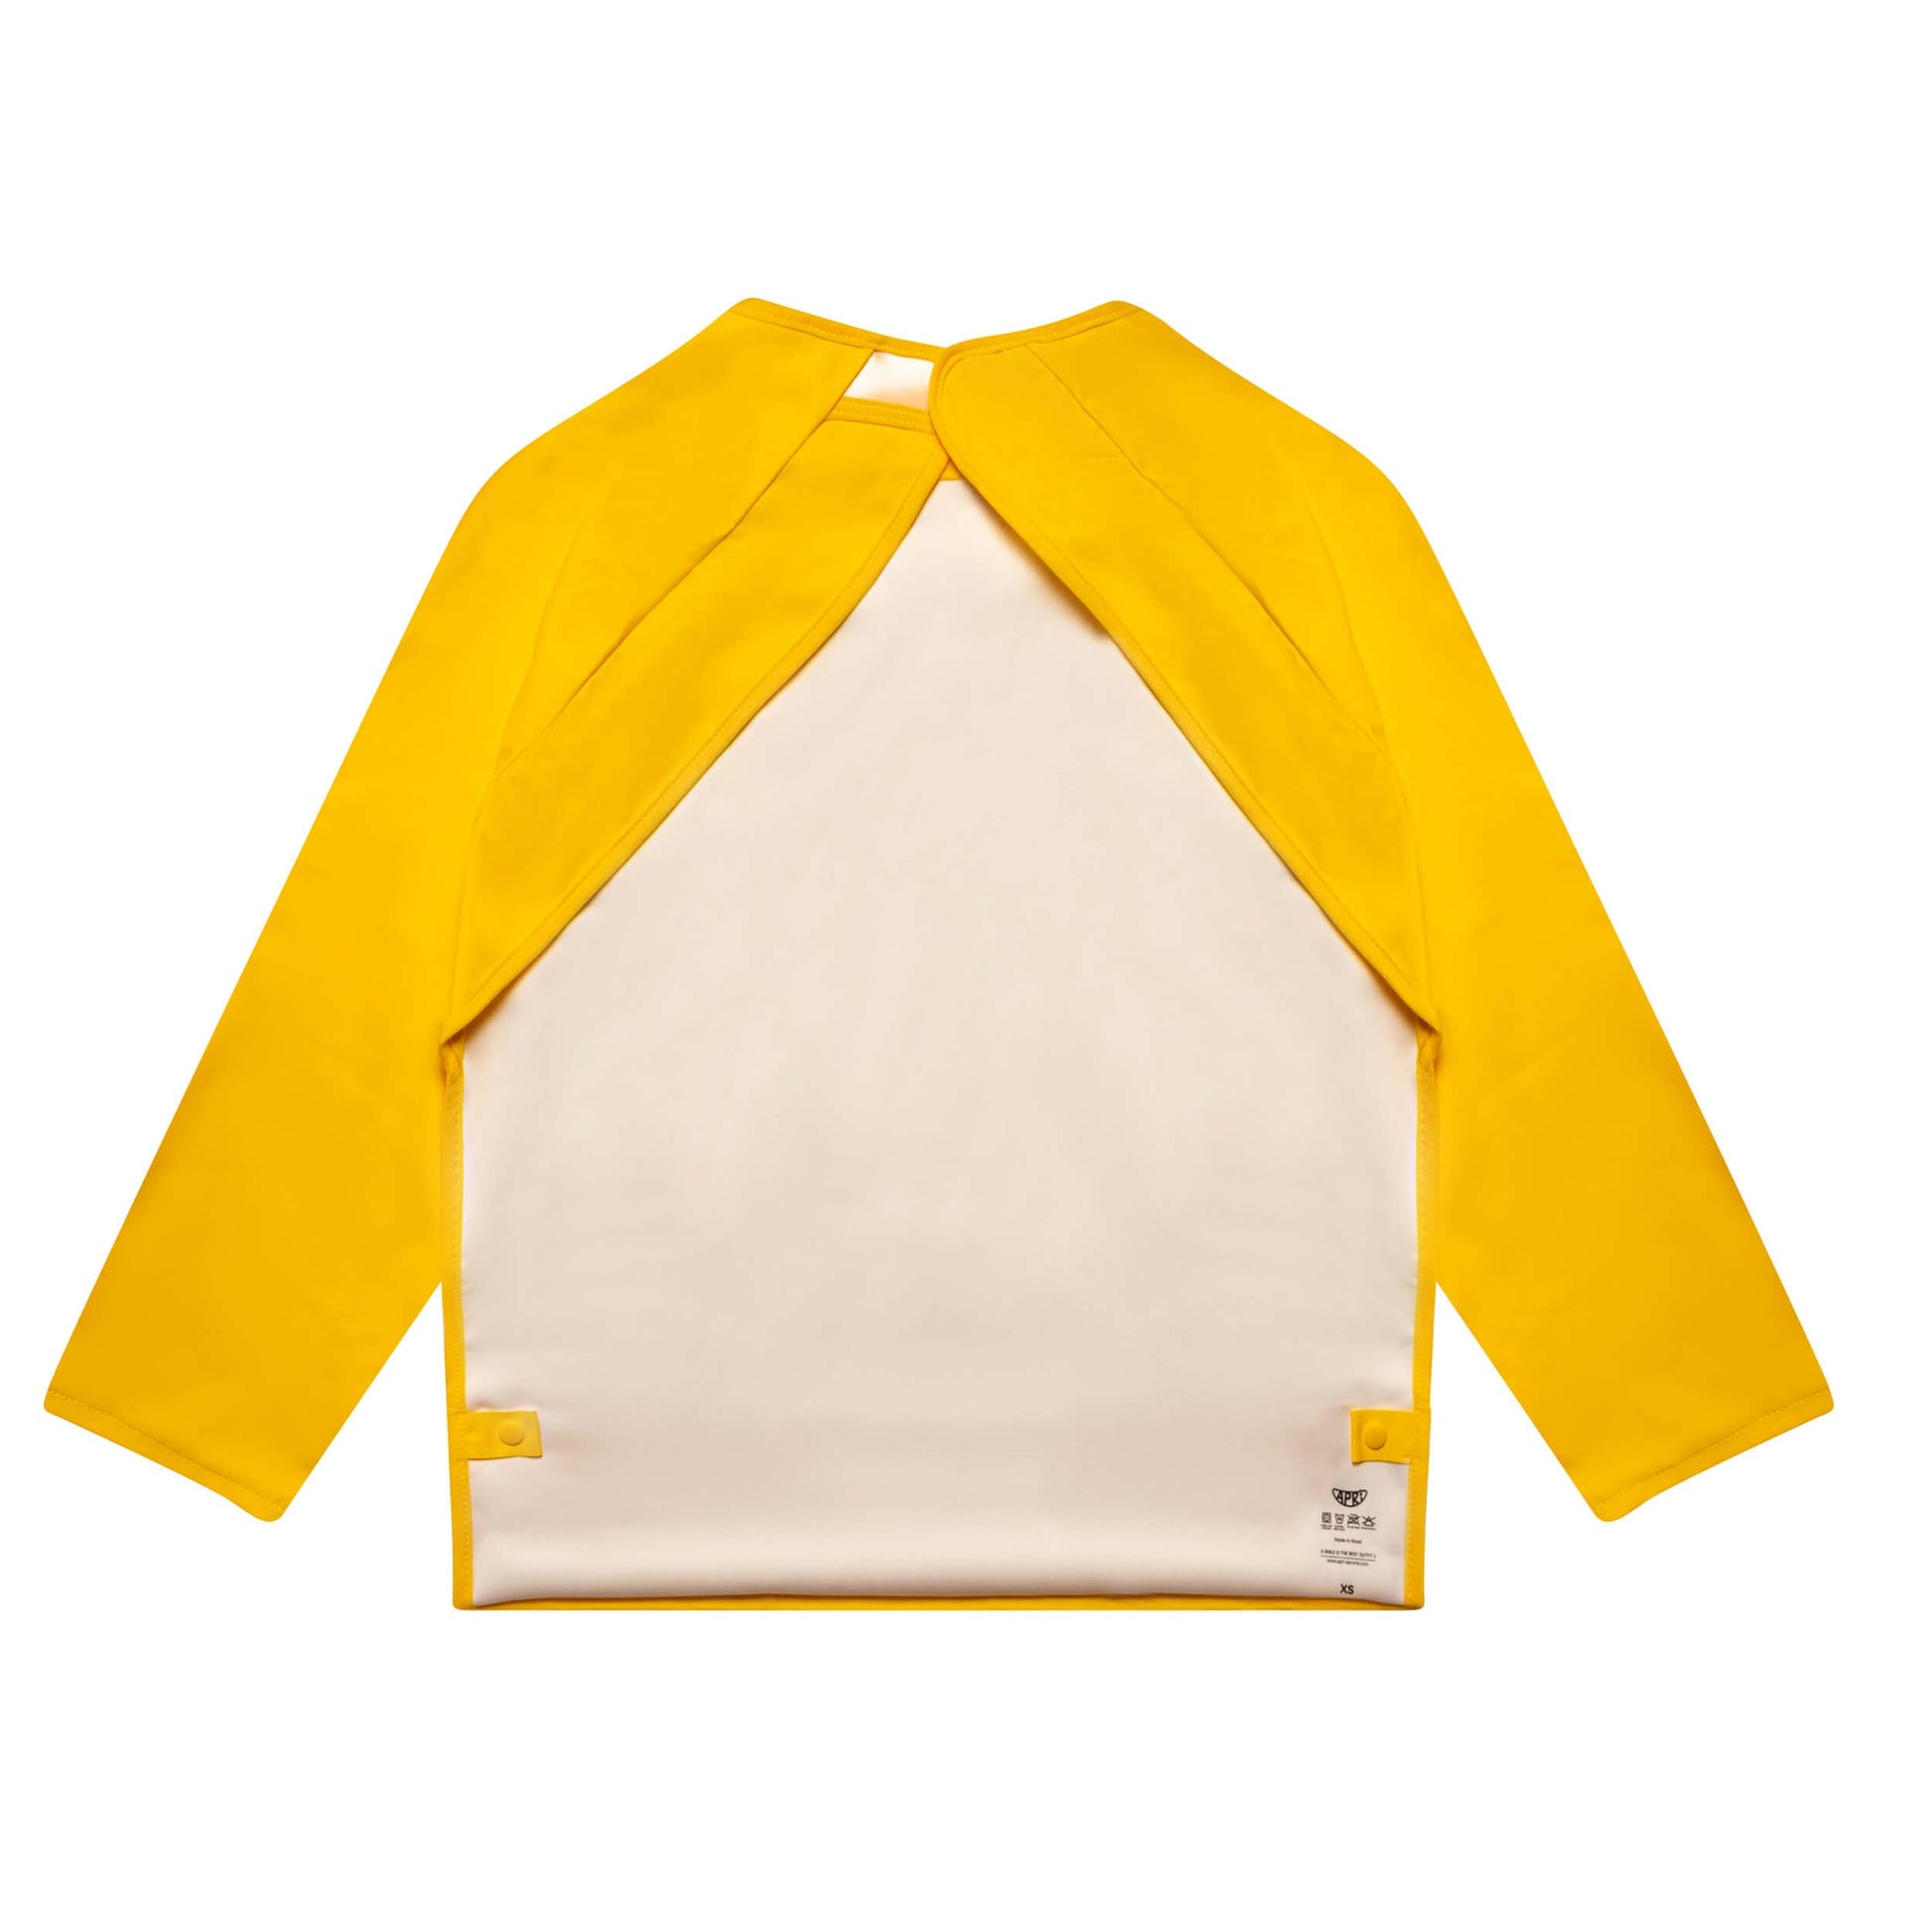 Washable bib for kids, teens, and adults with disabilities by Apri Bibs. Sunshine yellow, long-sleeves, and handy food pocket